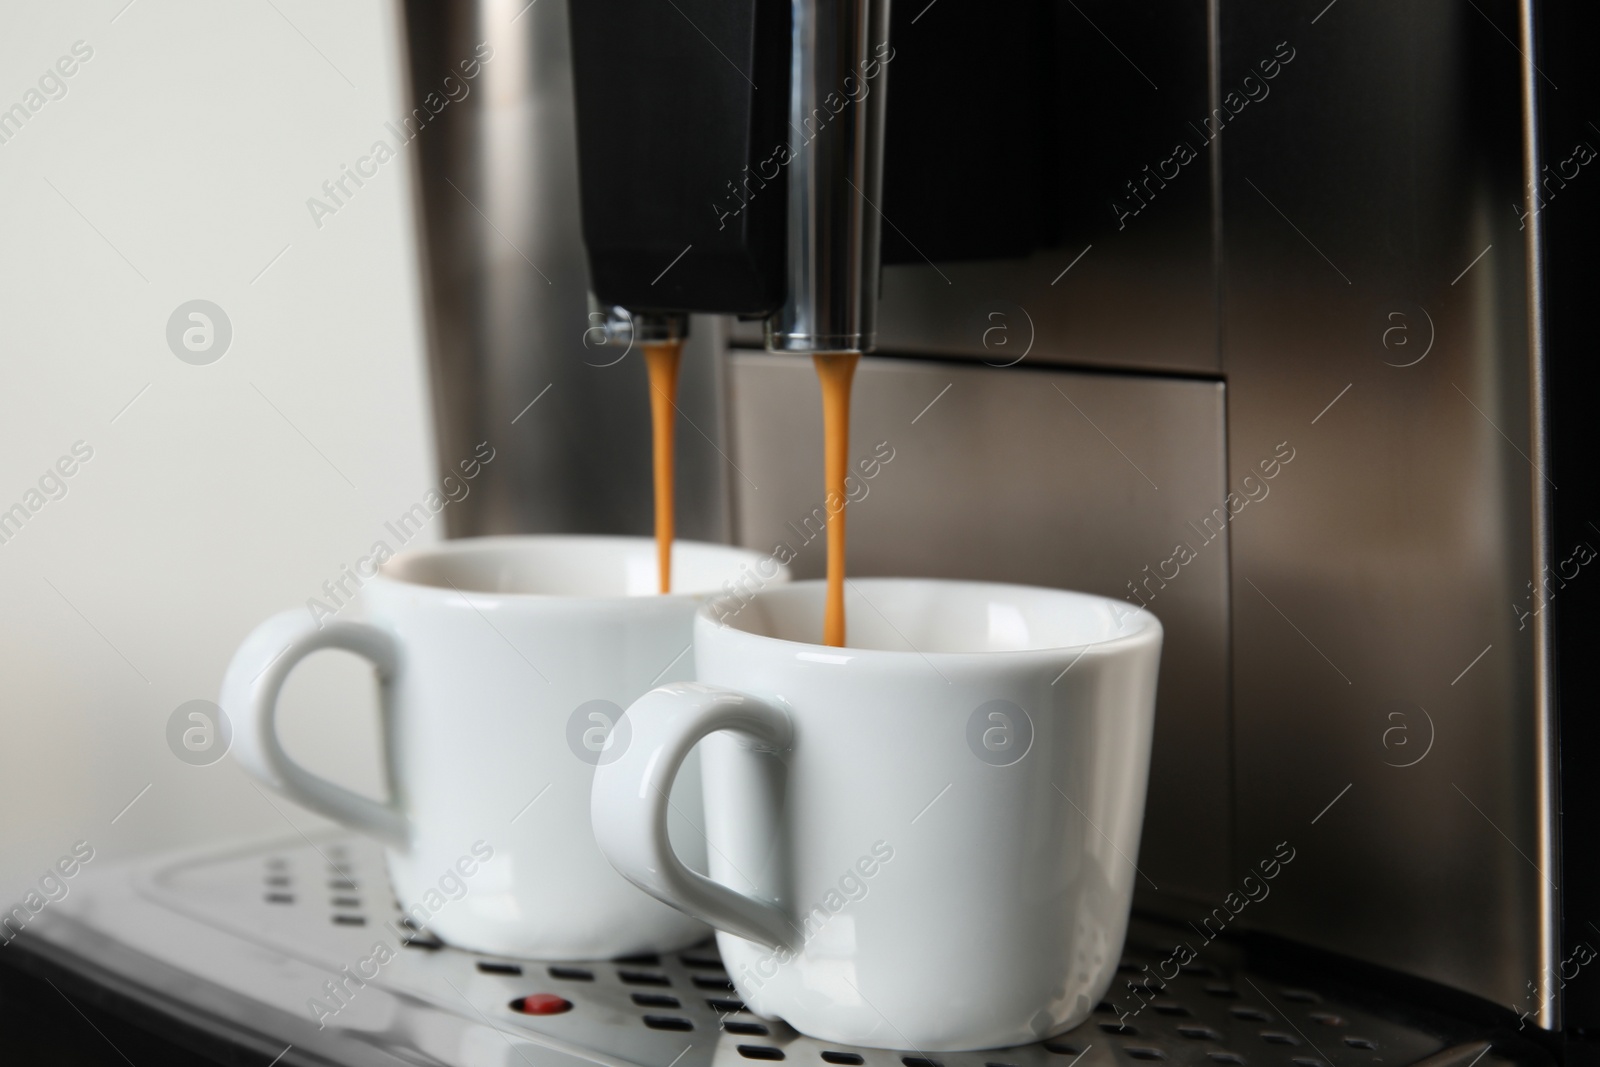 Photo of Espresso machine pouring coffee into cups against light background, closeup